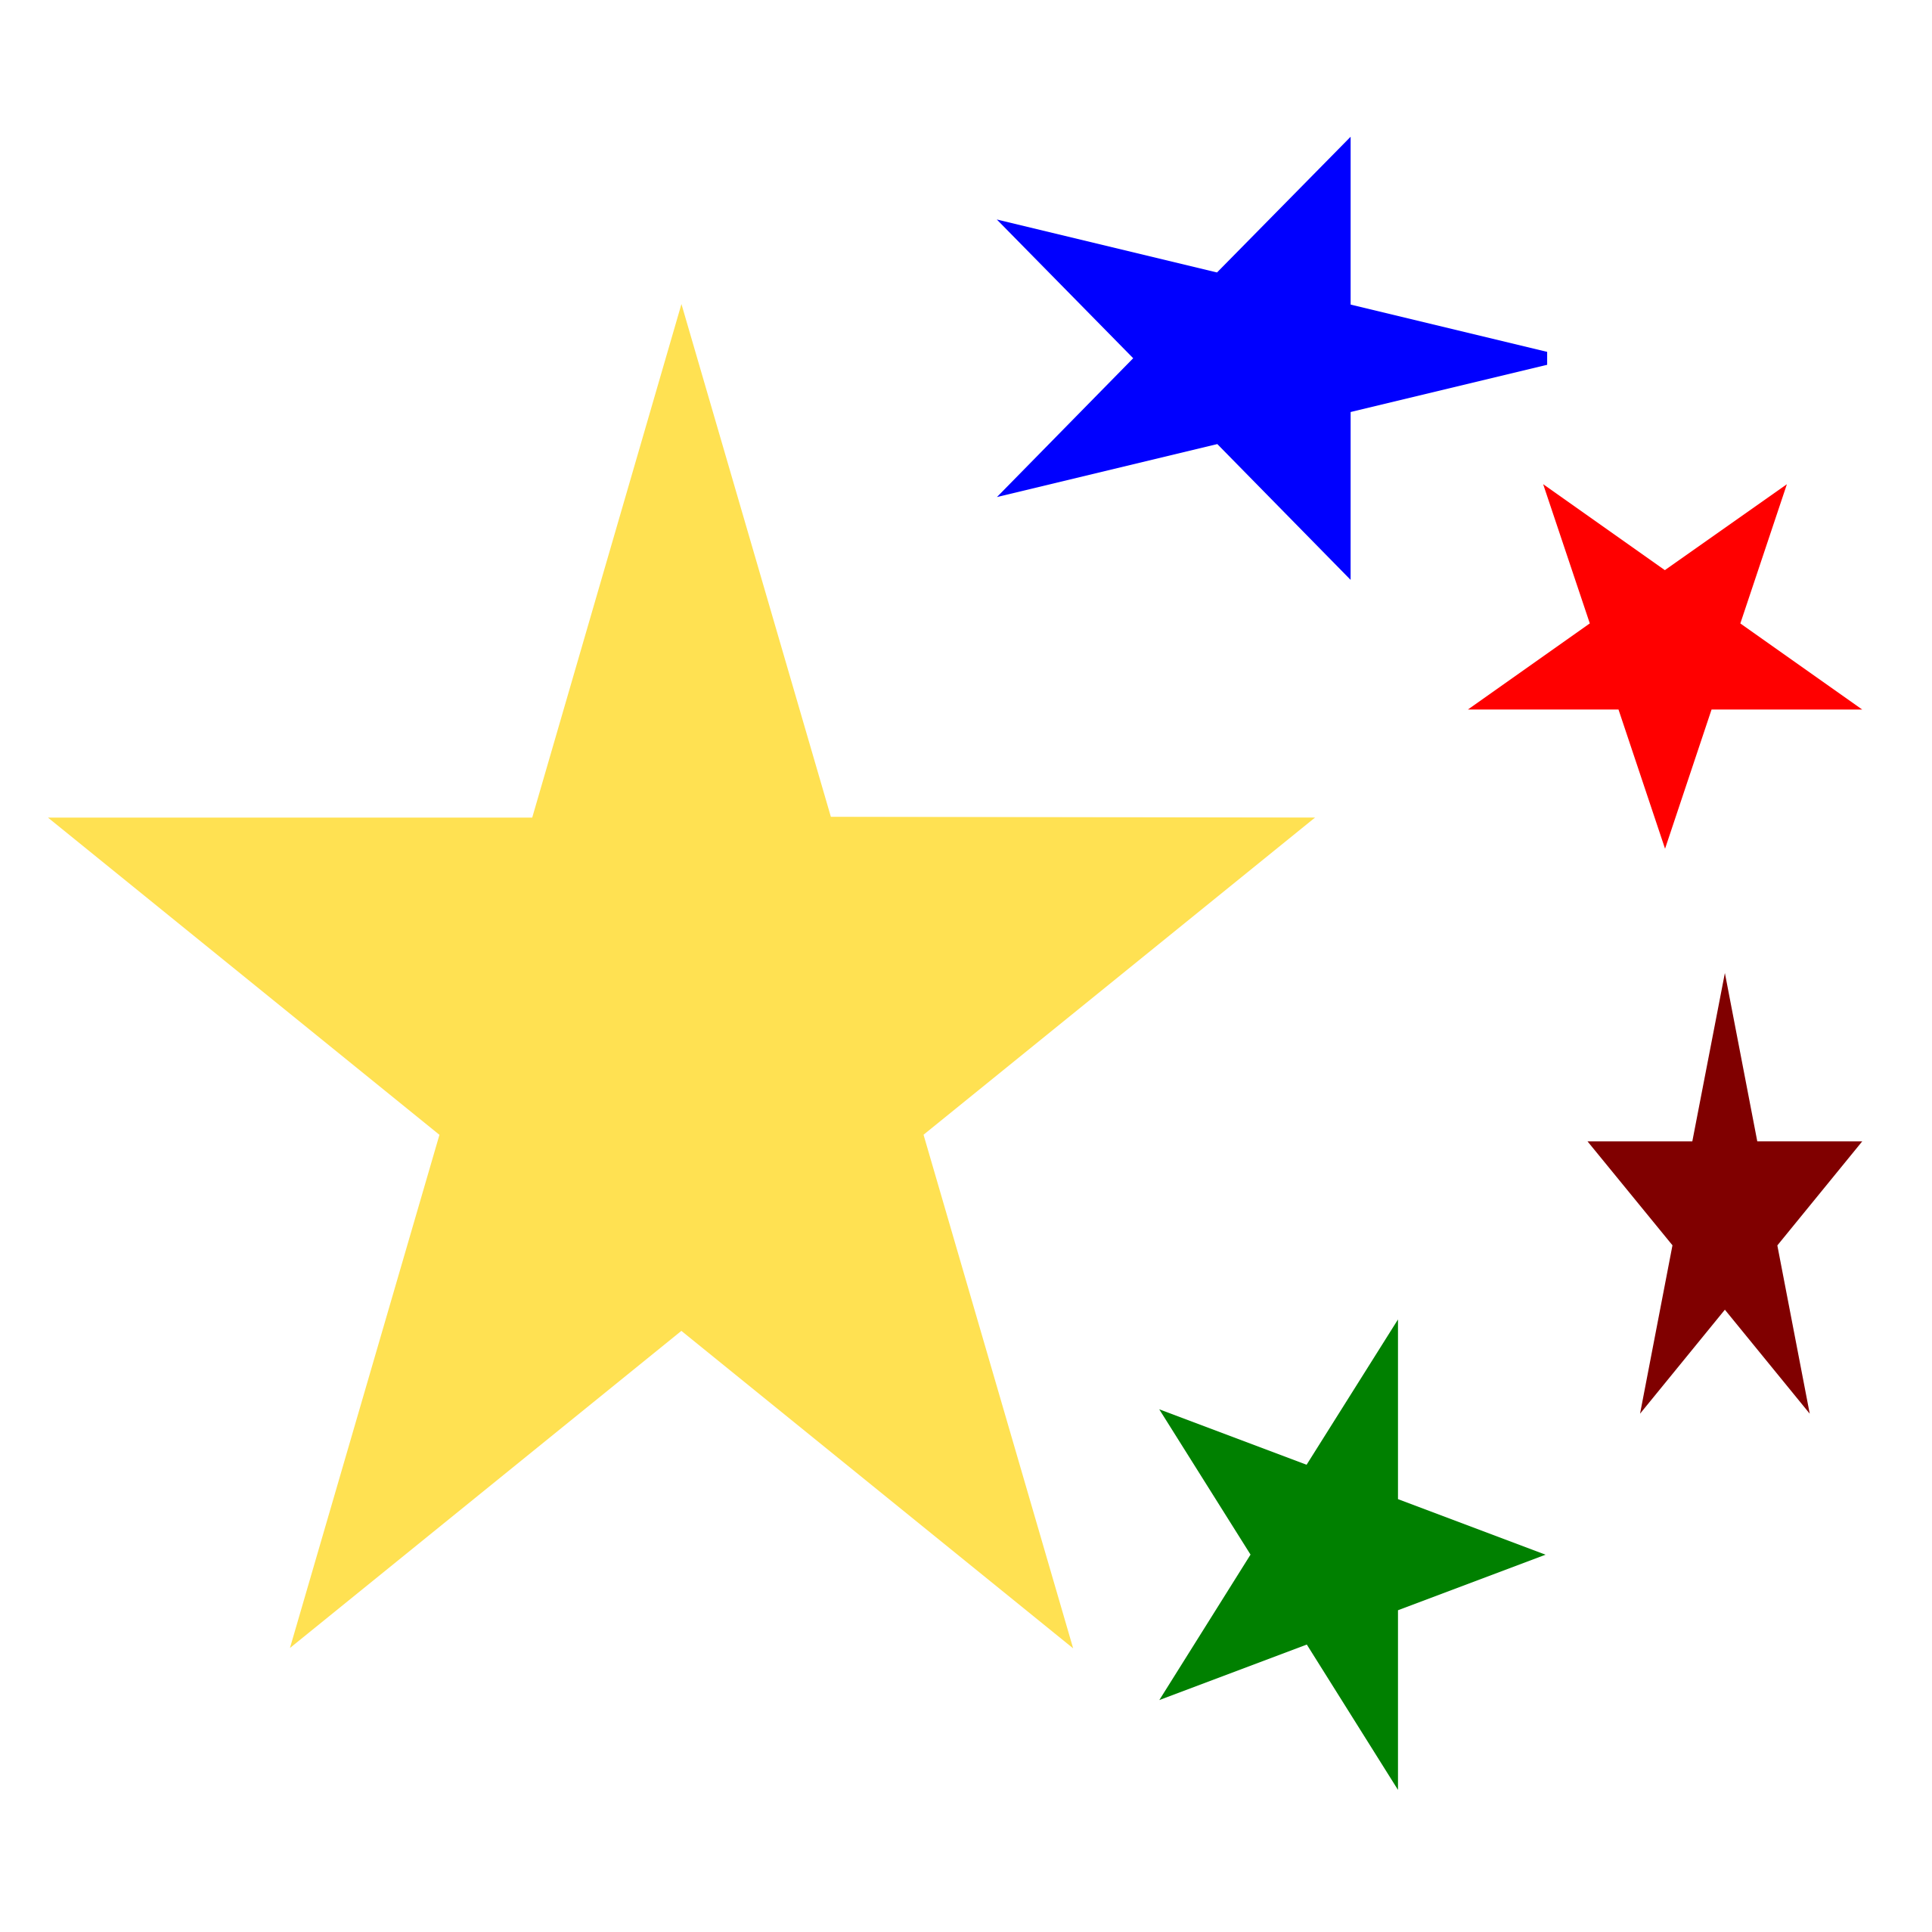 Clipart of a star